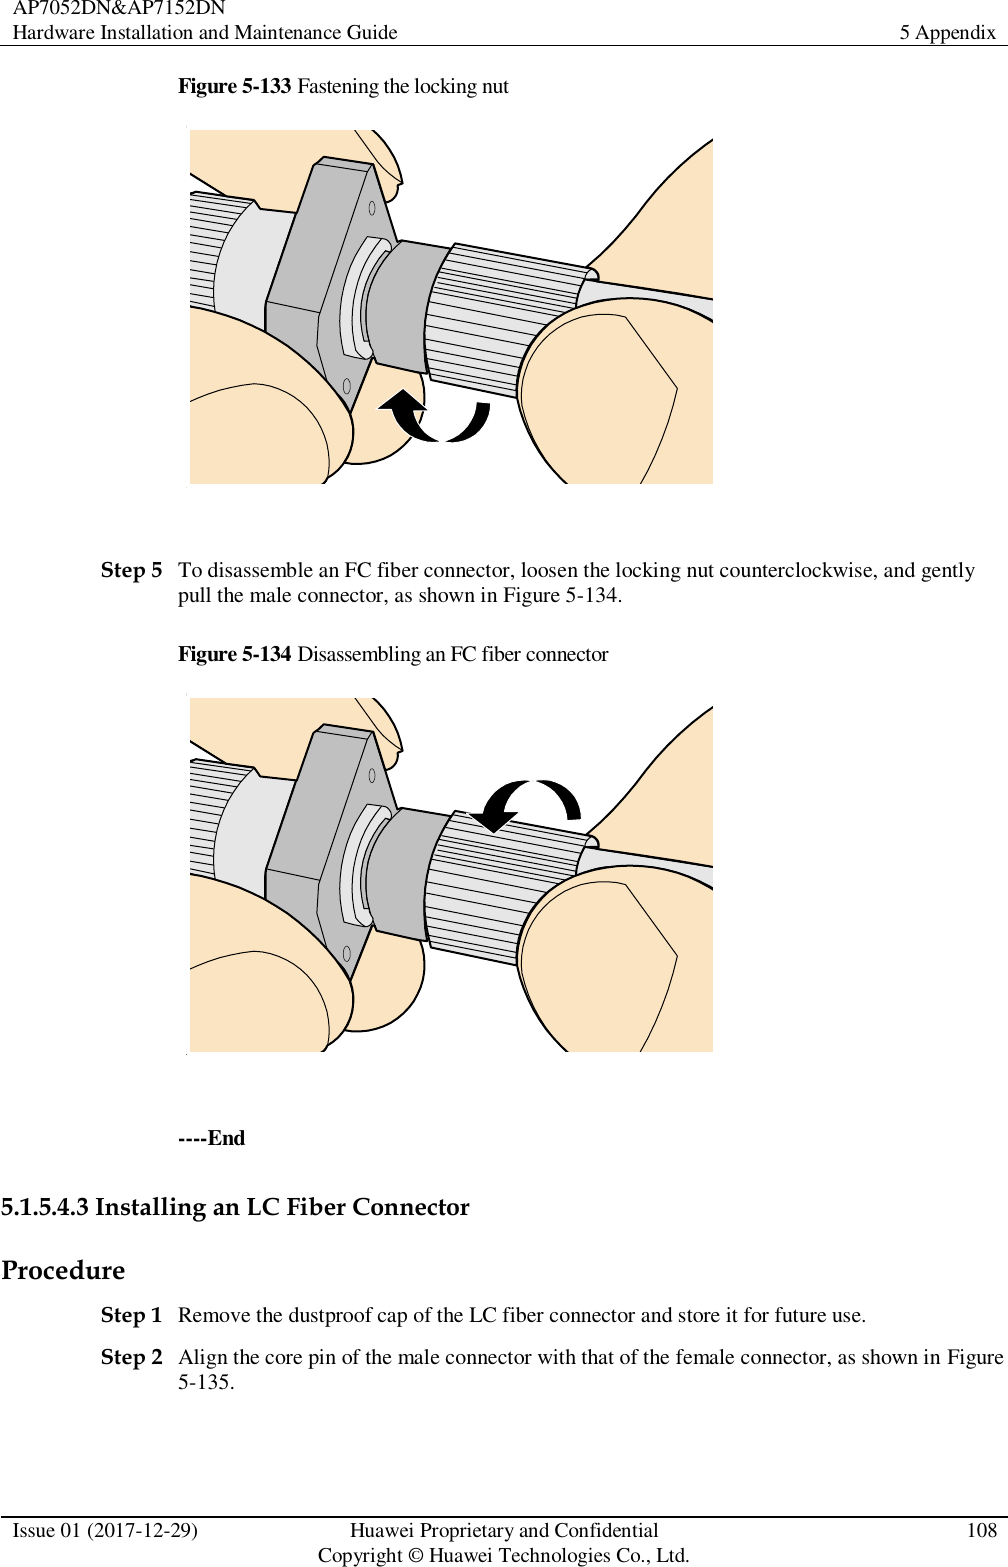 AP7052DN&amp;AP7152DN Hardware Installation and Maintenance Guide 5 Appendix  Issue 01 (2017-12-29) Huawei Proprietary and Confidential                                     Copyright © Huawei Technologies Co., Ltd. 108  Figure 5-133 Fastening the locking nut   Step 5 To disassemble an FC fiber connector, loosen the locking nut counterclockwise, and gently pull the male connector, as shown in Figure 5-134. Figure 5-134 Disassembling an FC fiber connector   ----End 5.1.5.4.3 Installing an LC Fiber Connector Procedure Step 1 Remove the dustproof cap of the LC fiber connector and store it for future use. Step 2 Align the core pin of the male connector with that of the female connector, as shown in Figure 5-135. 